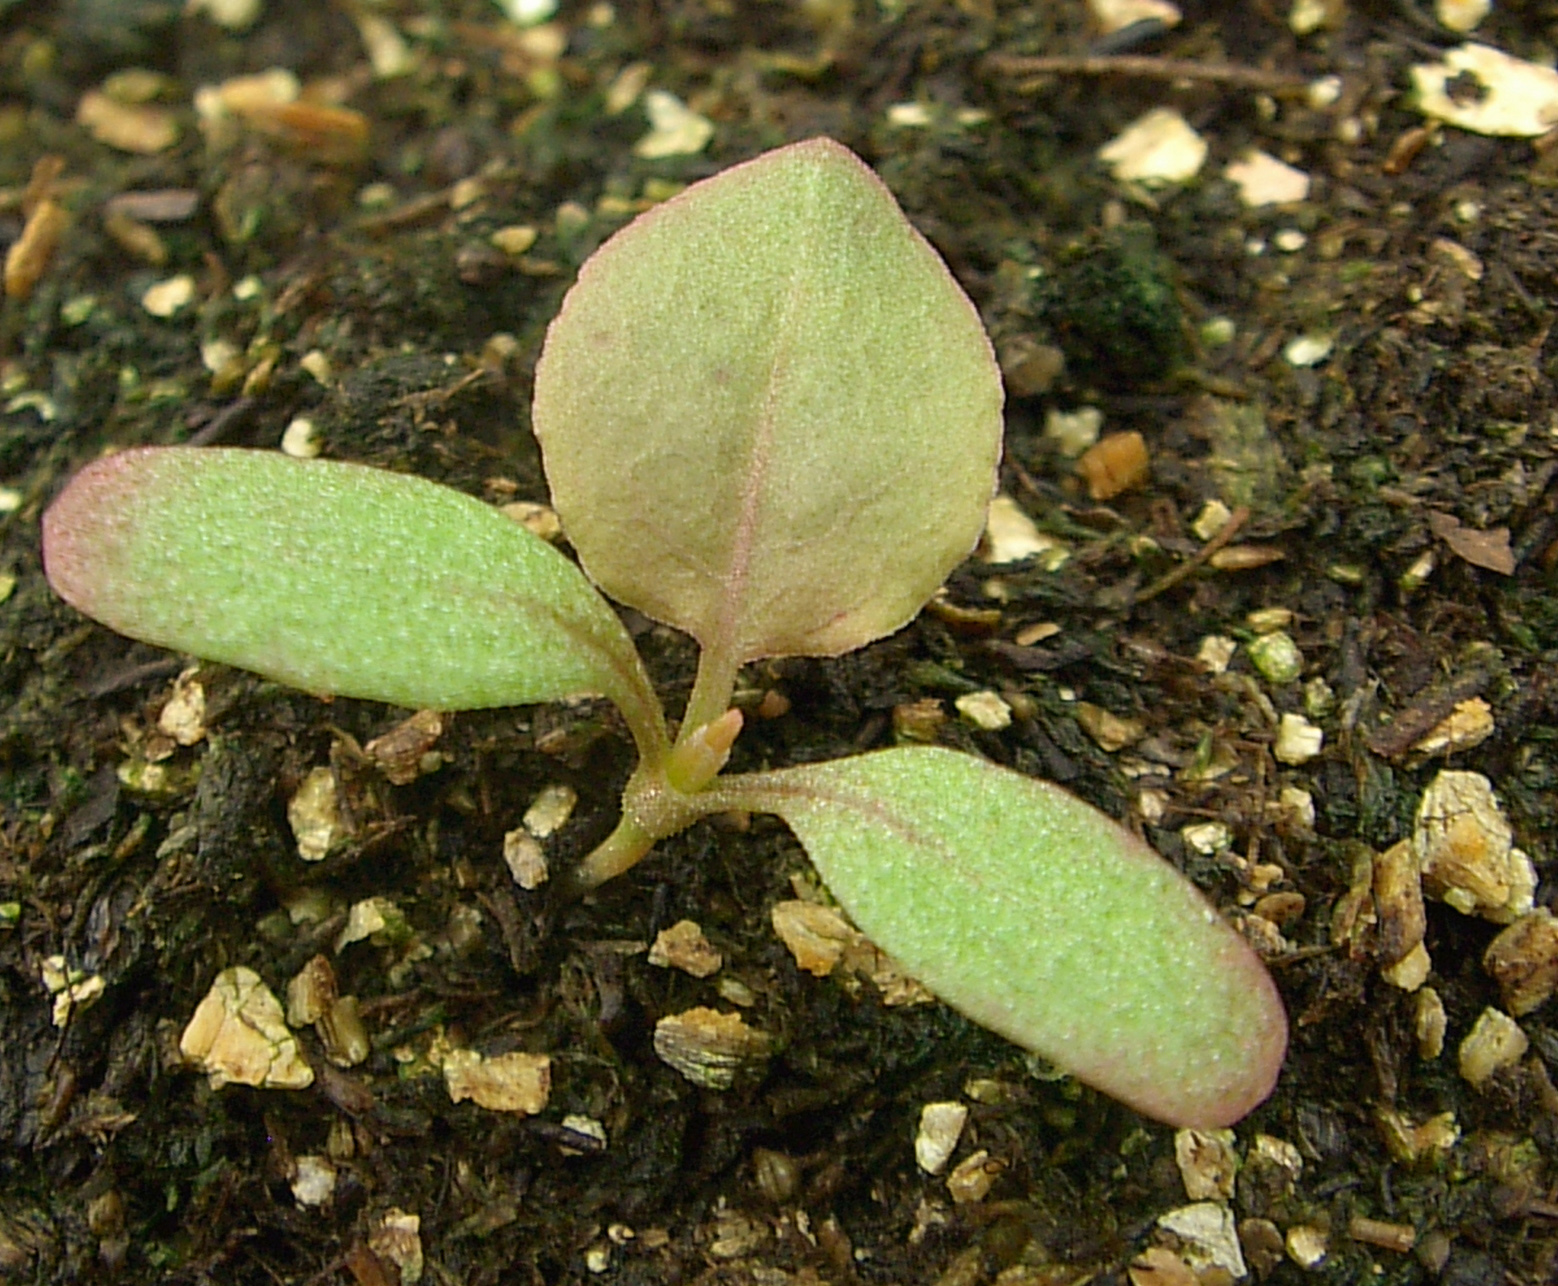 The elongated cotyledons and round first leaves